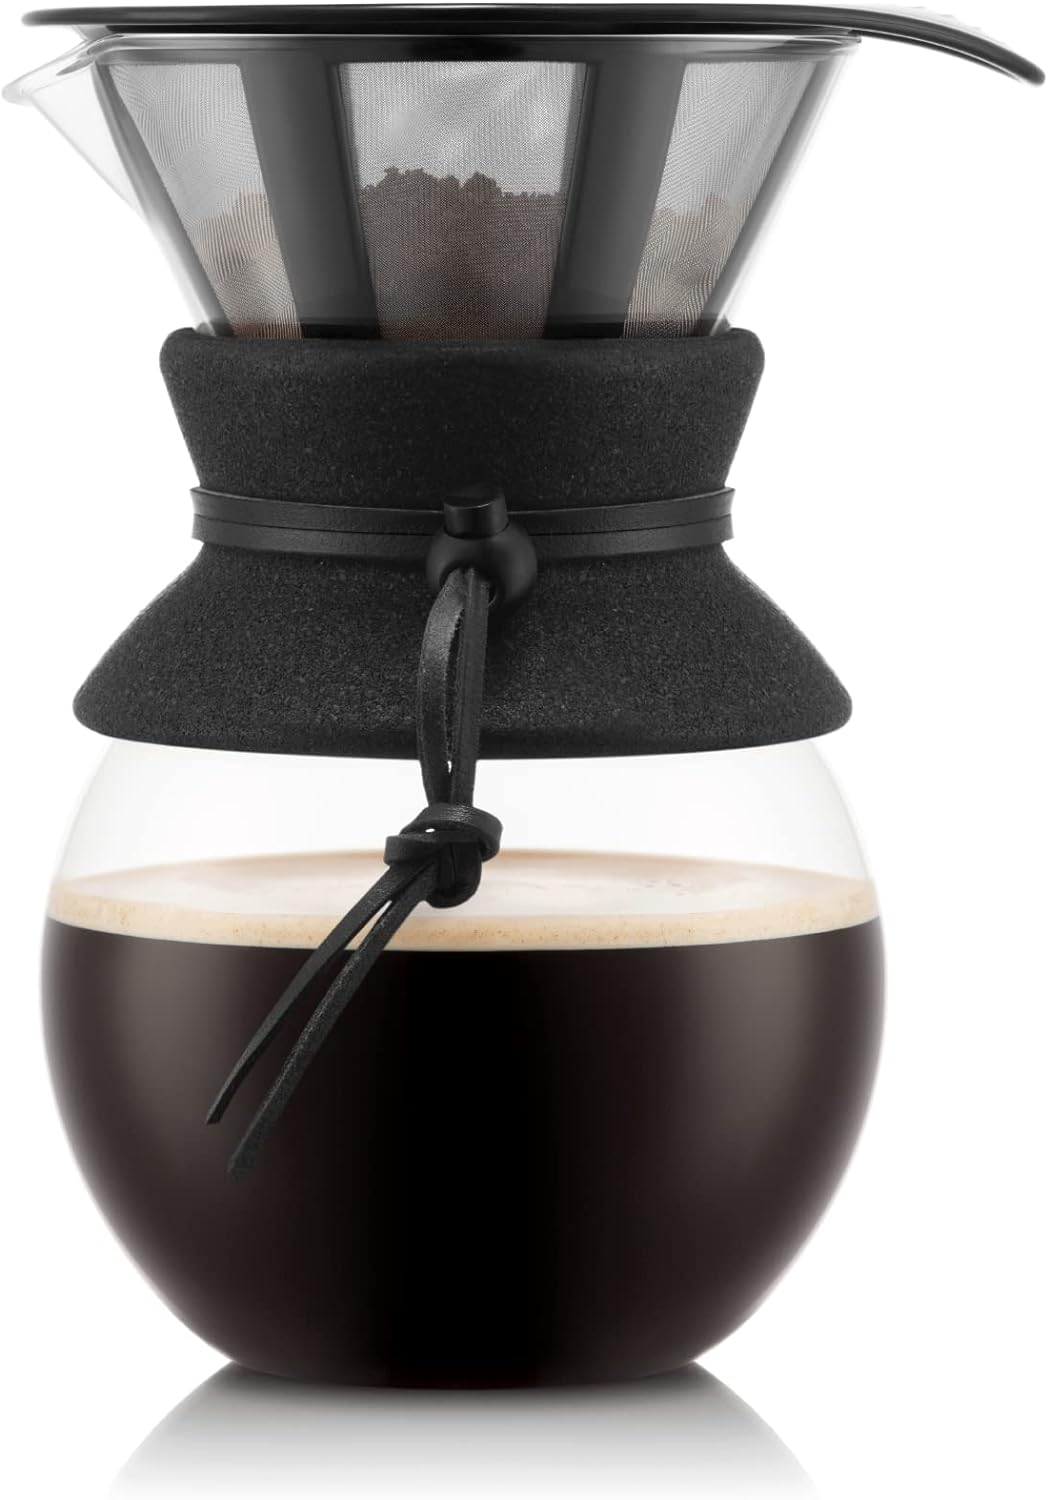 Bodum POUR OVER Coffee Maker with Permanent Coffee Filter, 8 Cups, 1.0 L, Stainless Steel